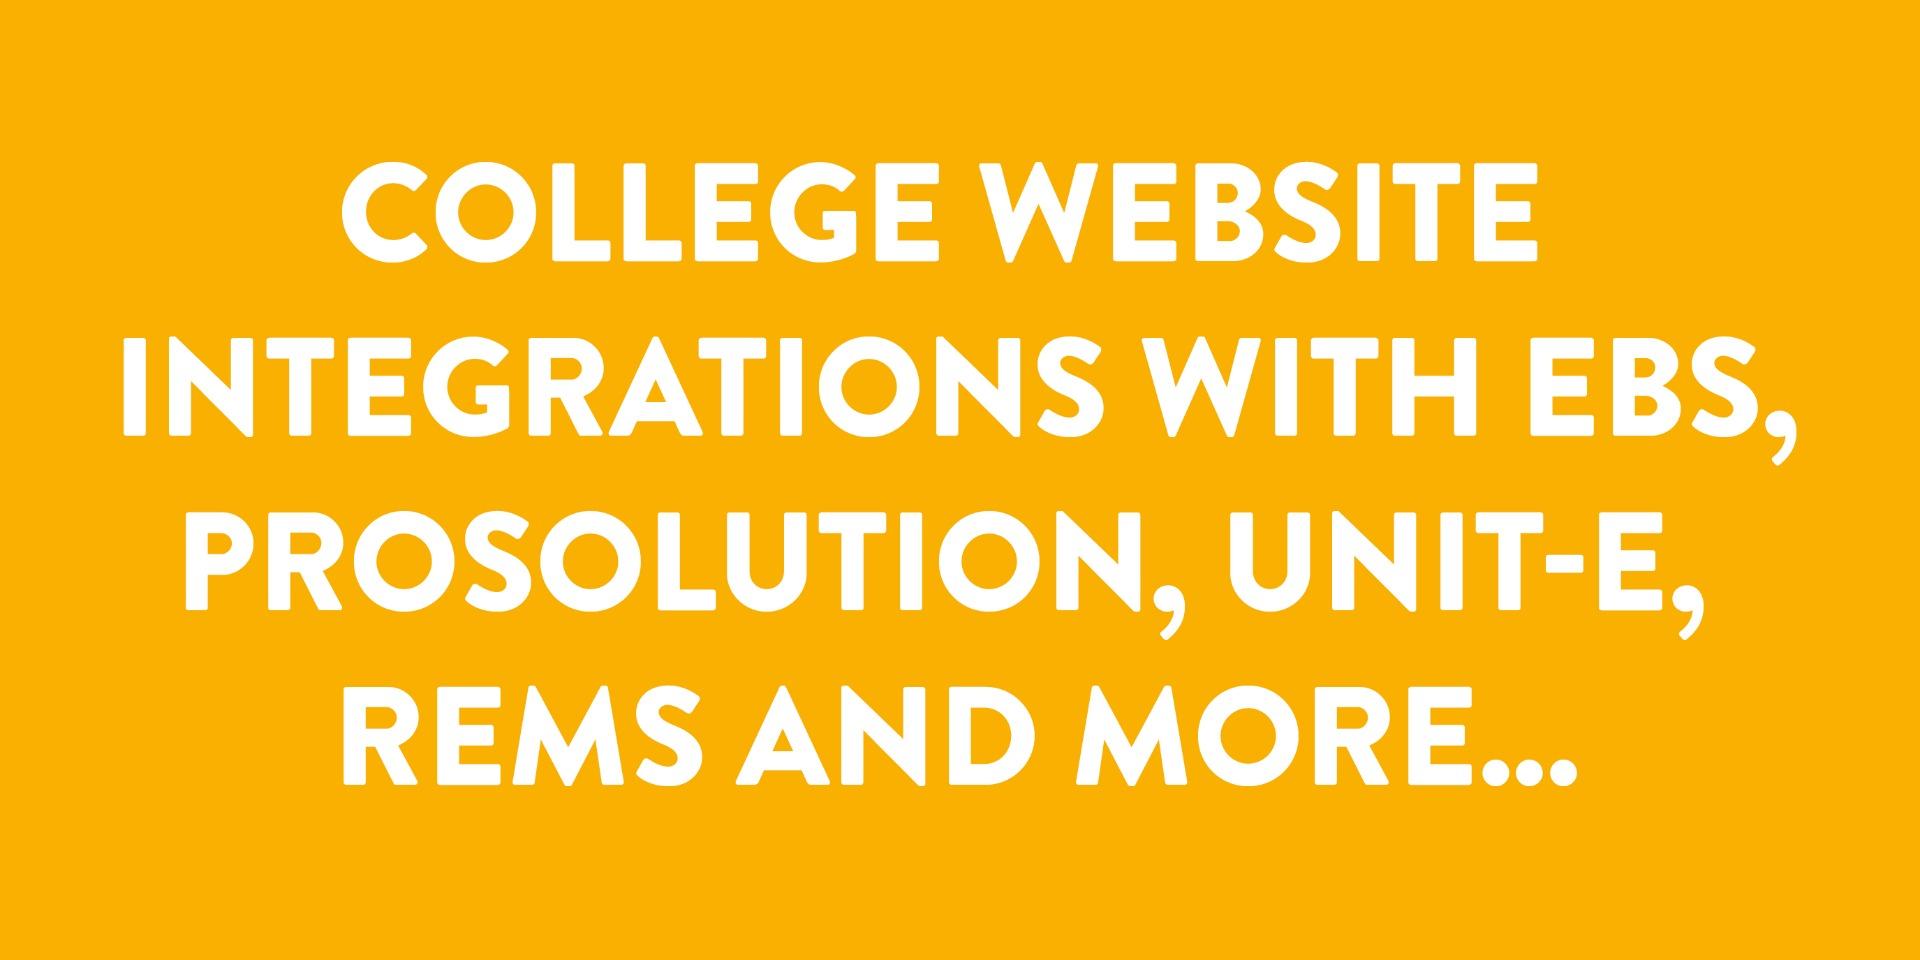 College website integrations with EBS, ProSolution, UNIT-e, REMS and more